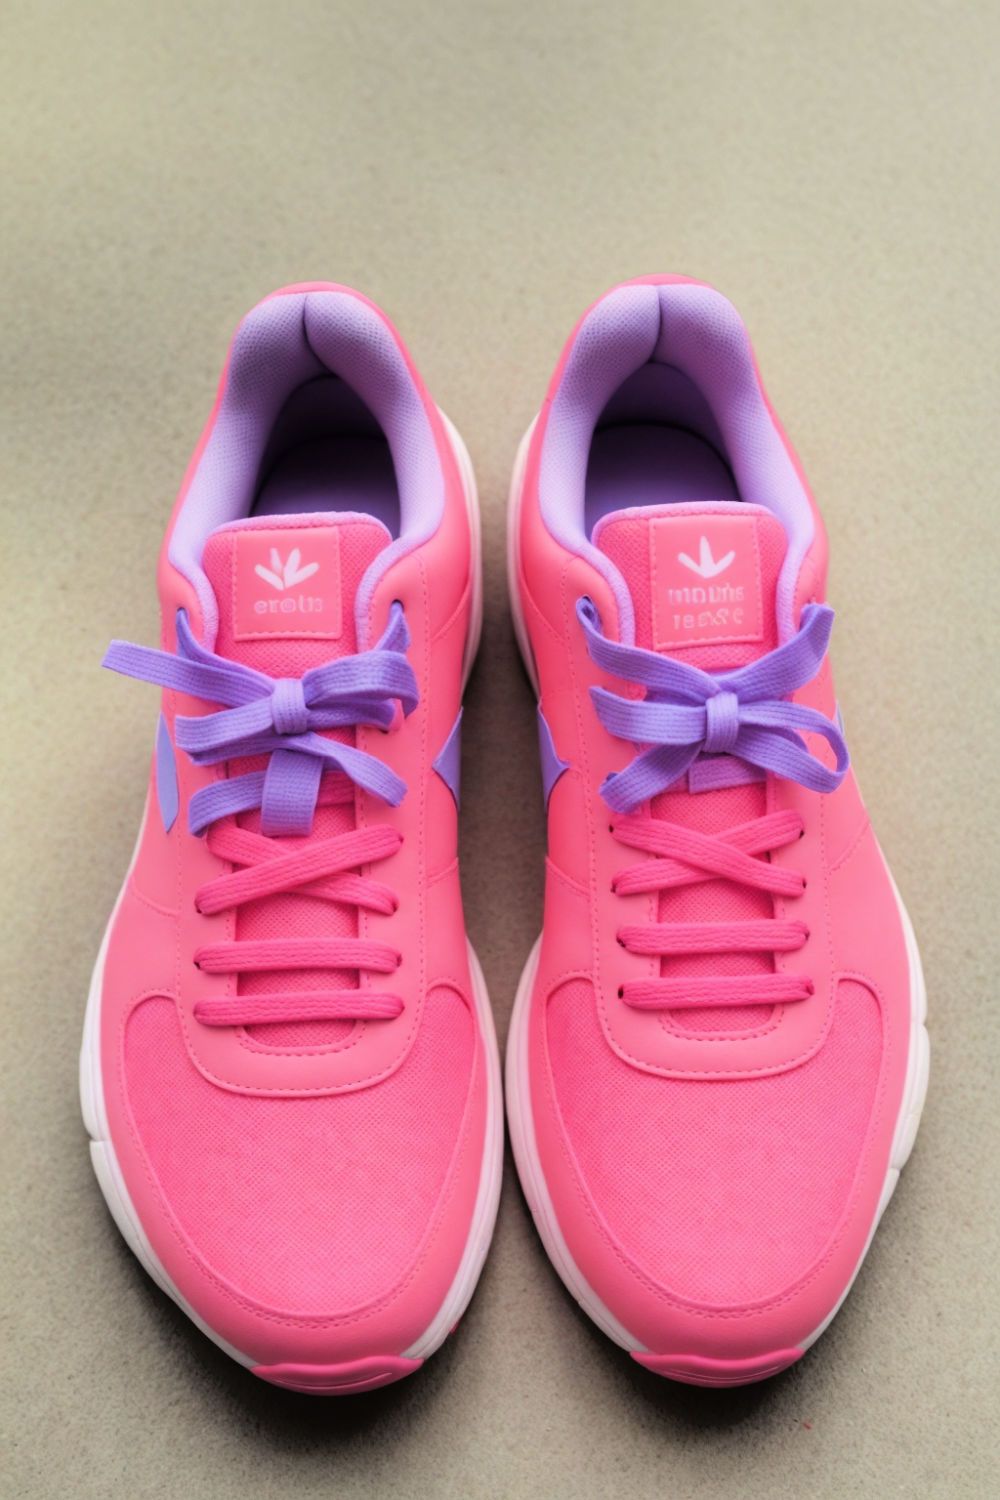 brightly colored sneakers